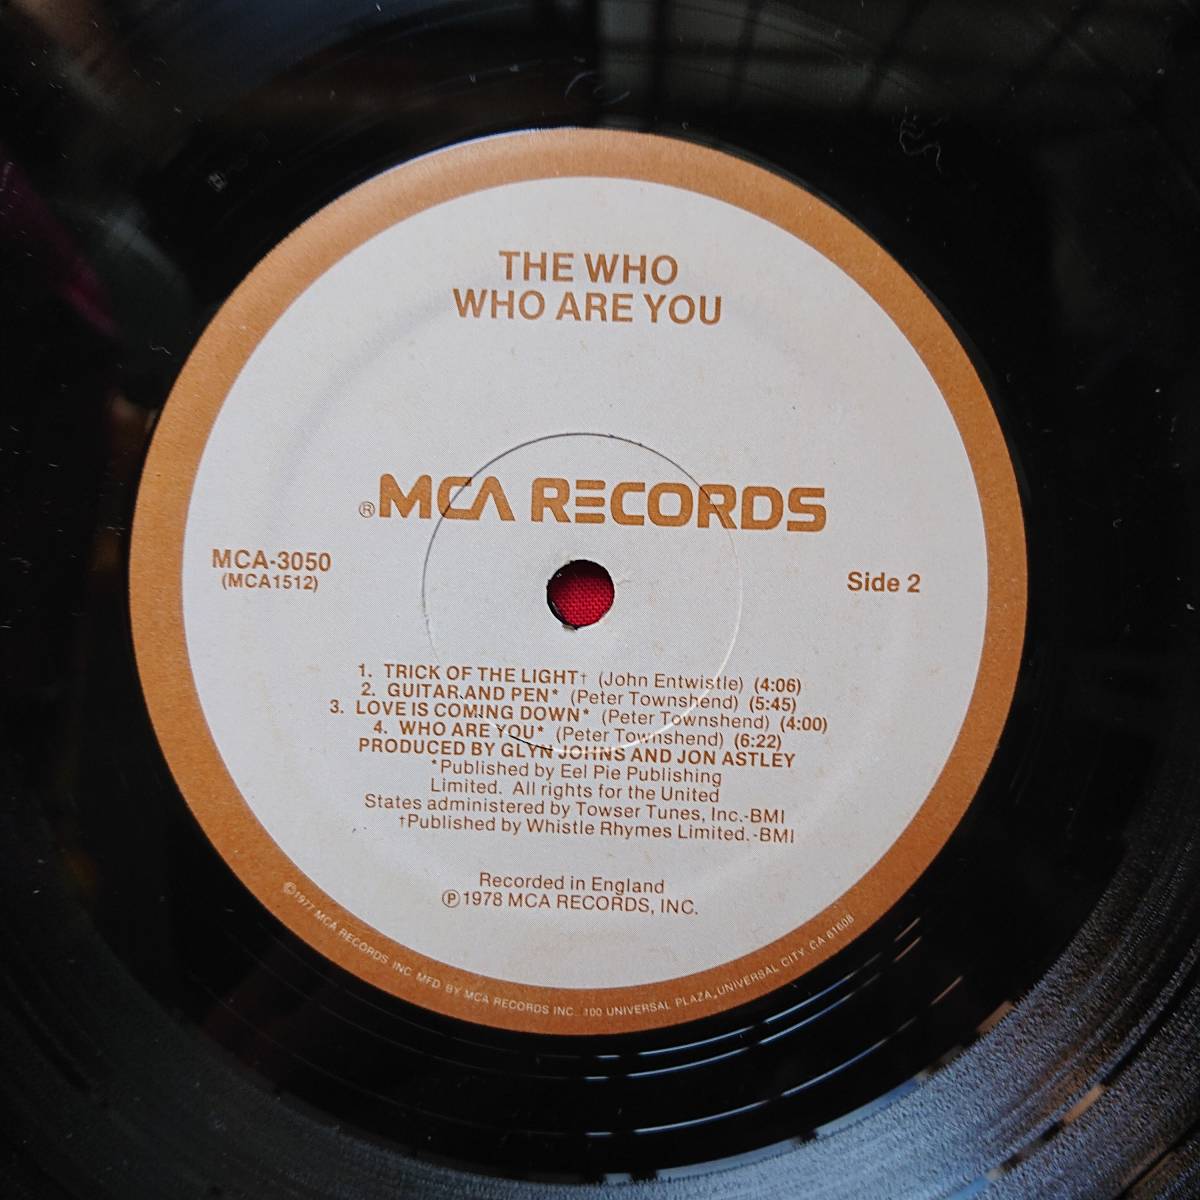 The Who／Who Are You MCA-3050 レア盤 エラー盤 両面にside2のレーベル貼付_画像7